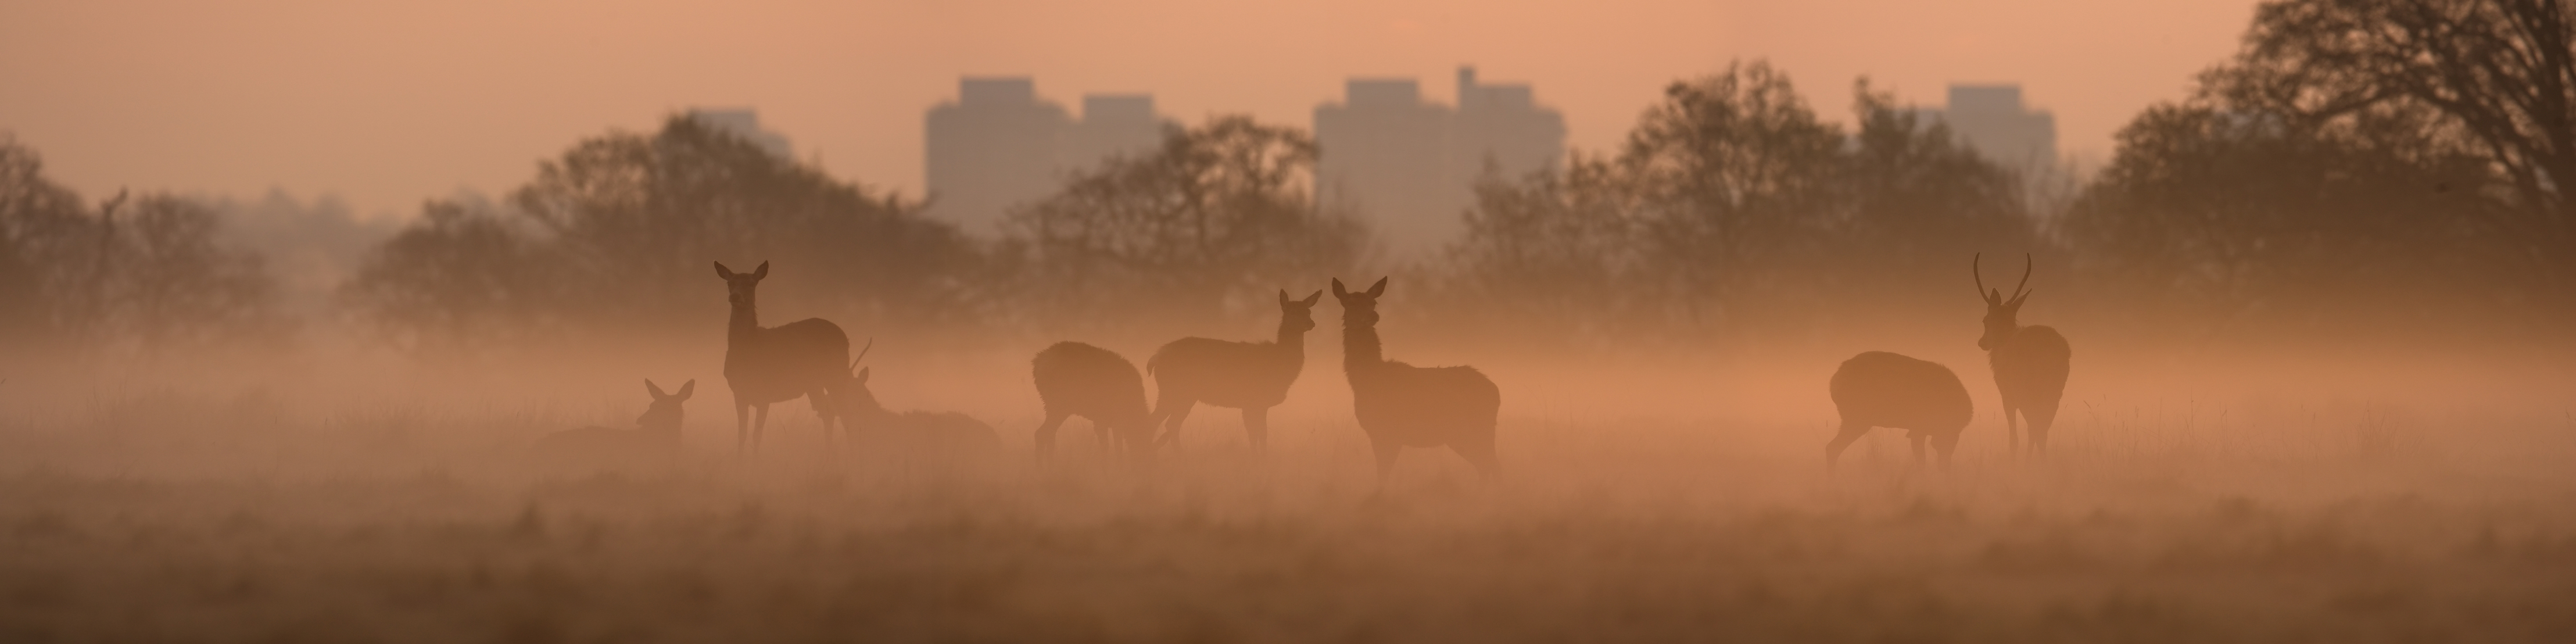 Deer and City - Photo © Graeme Purdy - iStock